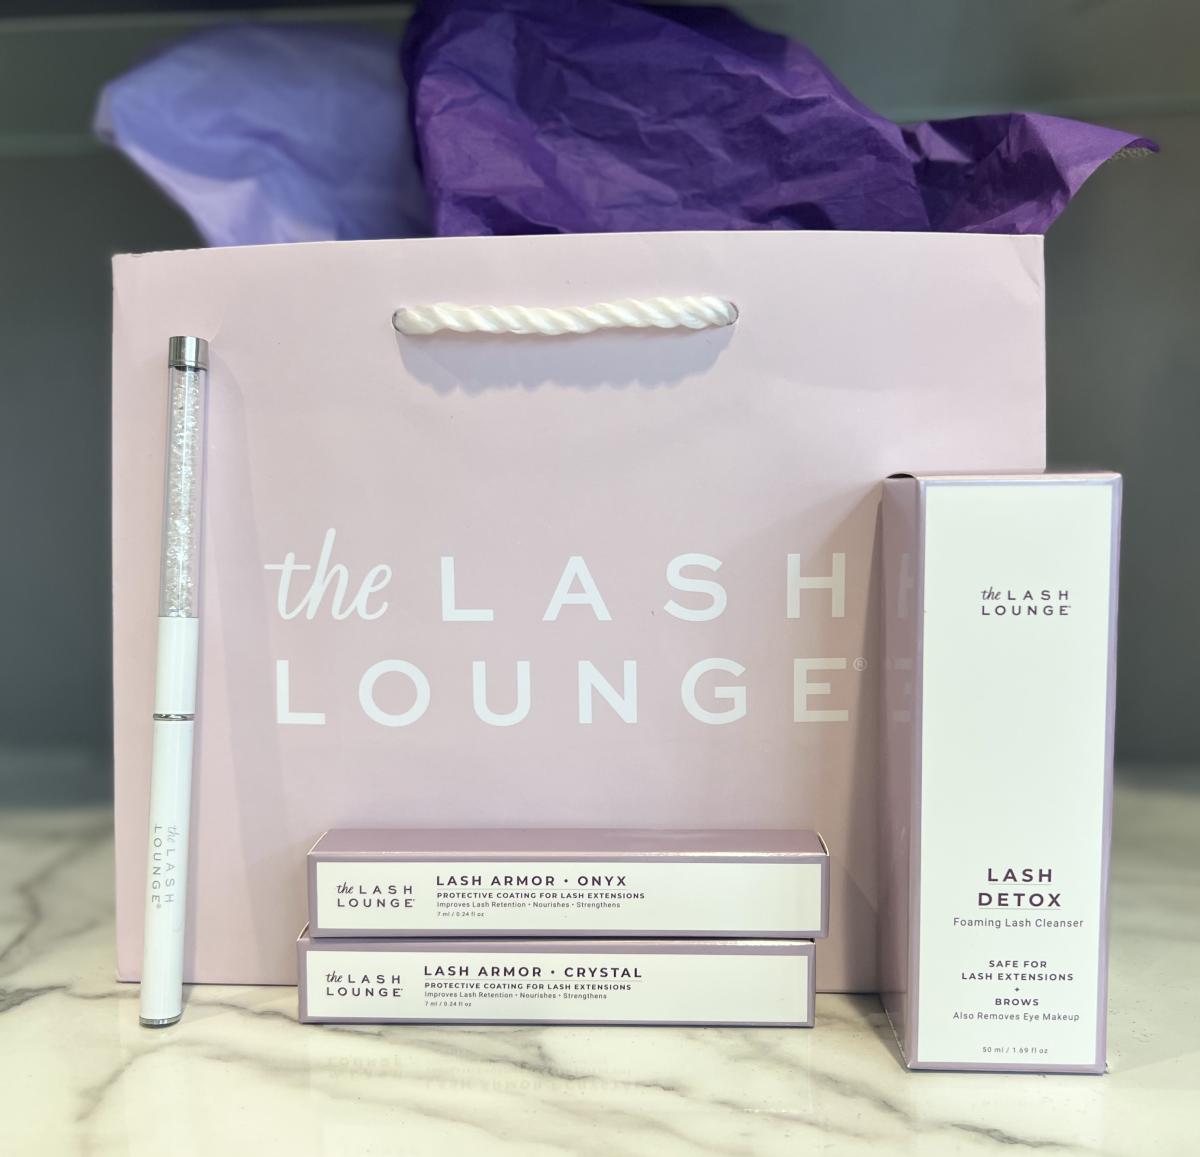 A gift bag from the Lash Lounge in Princeton, NJ